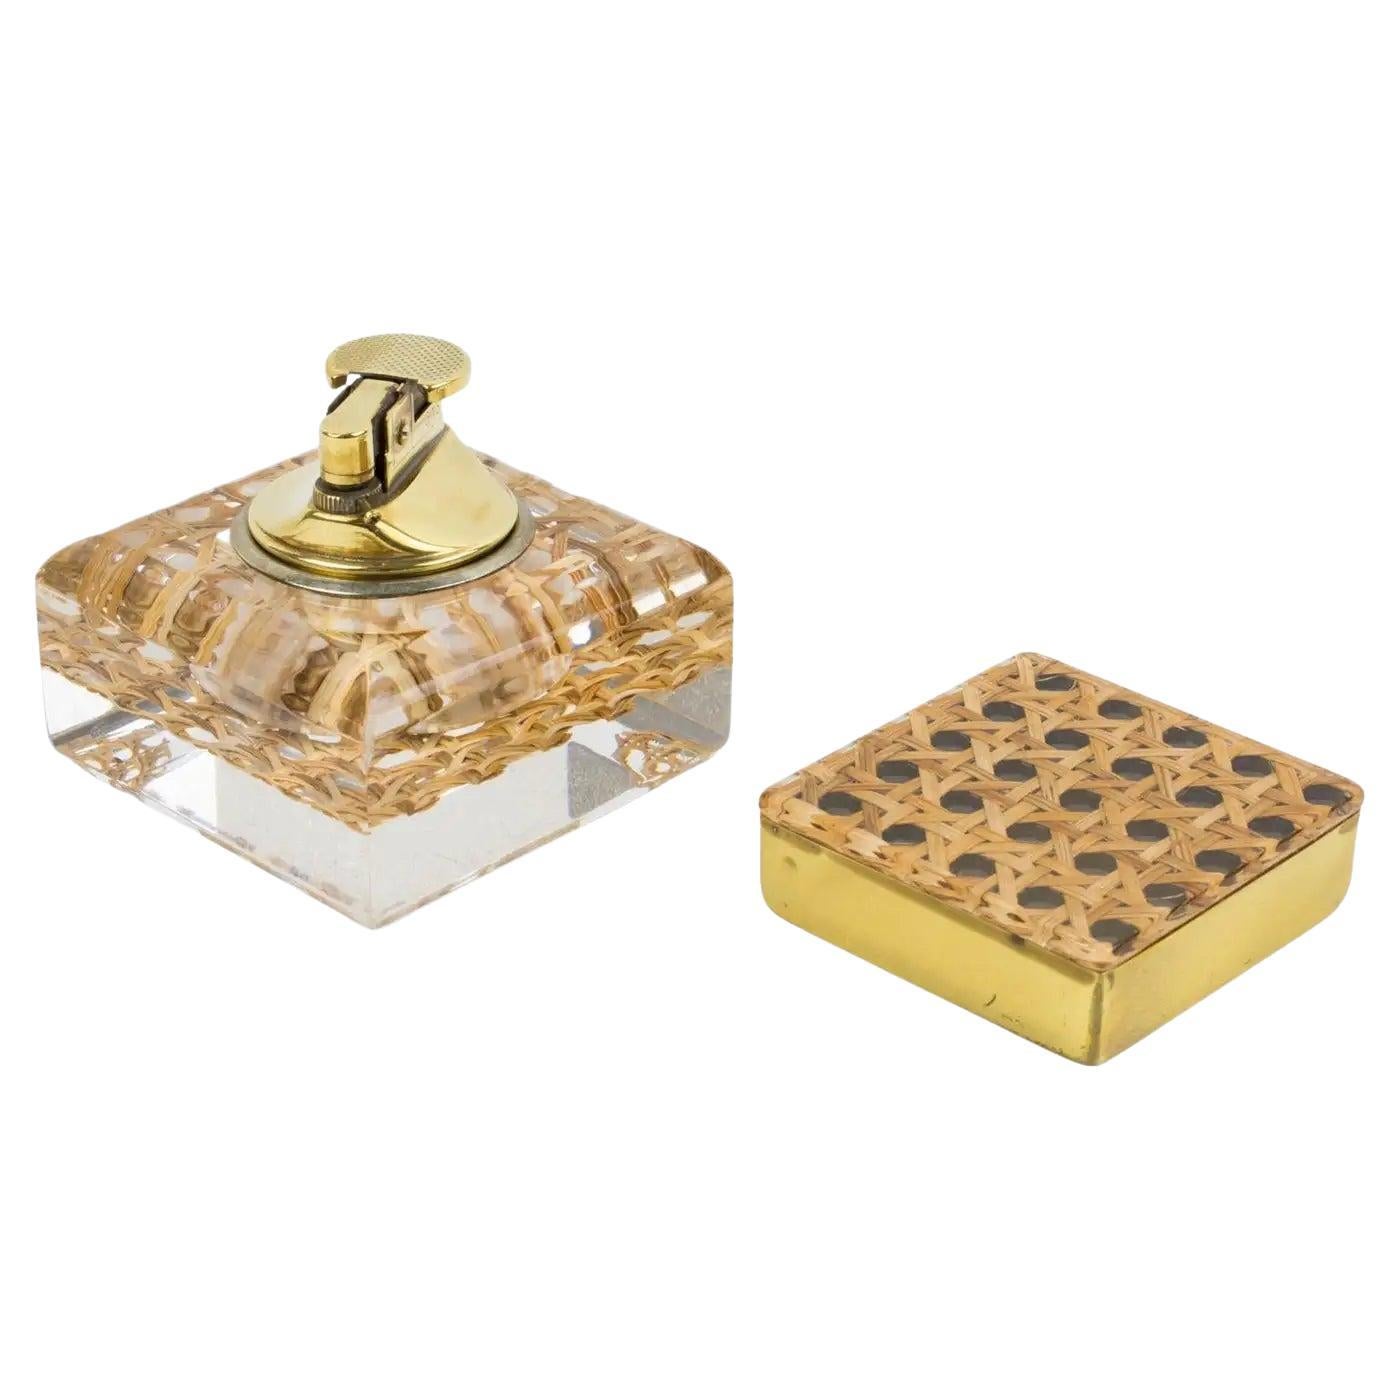 Lucite, Rattan and Brass Smoking Set Lighter and Box, 1970s For Sale